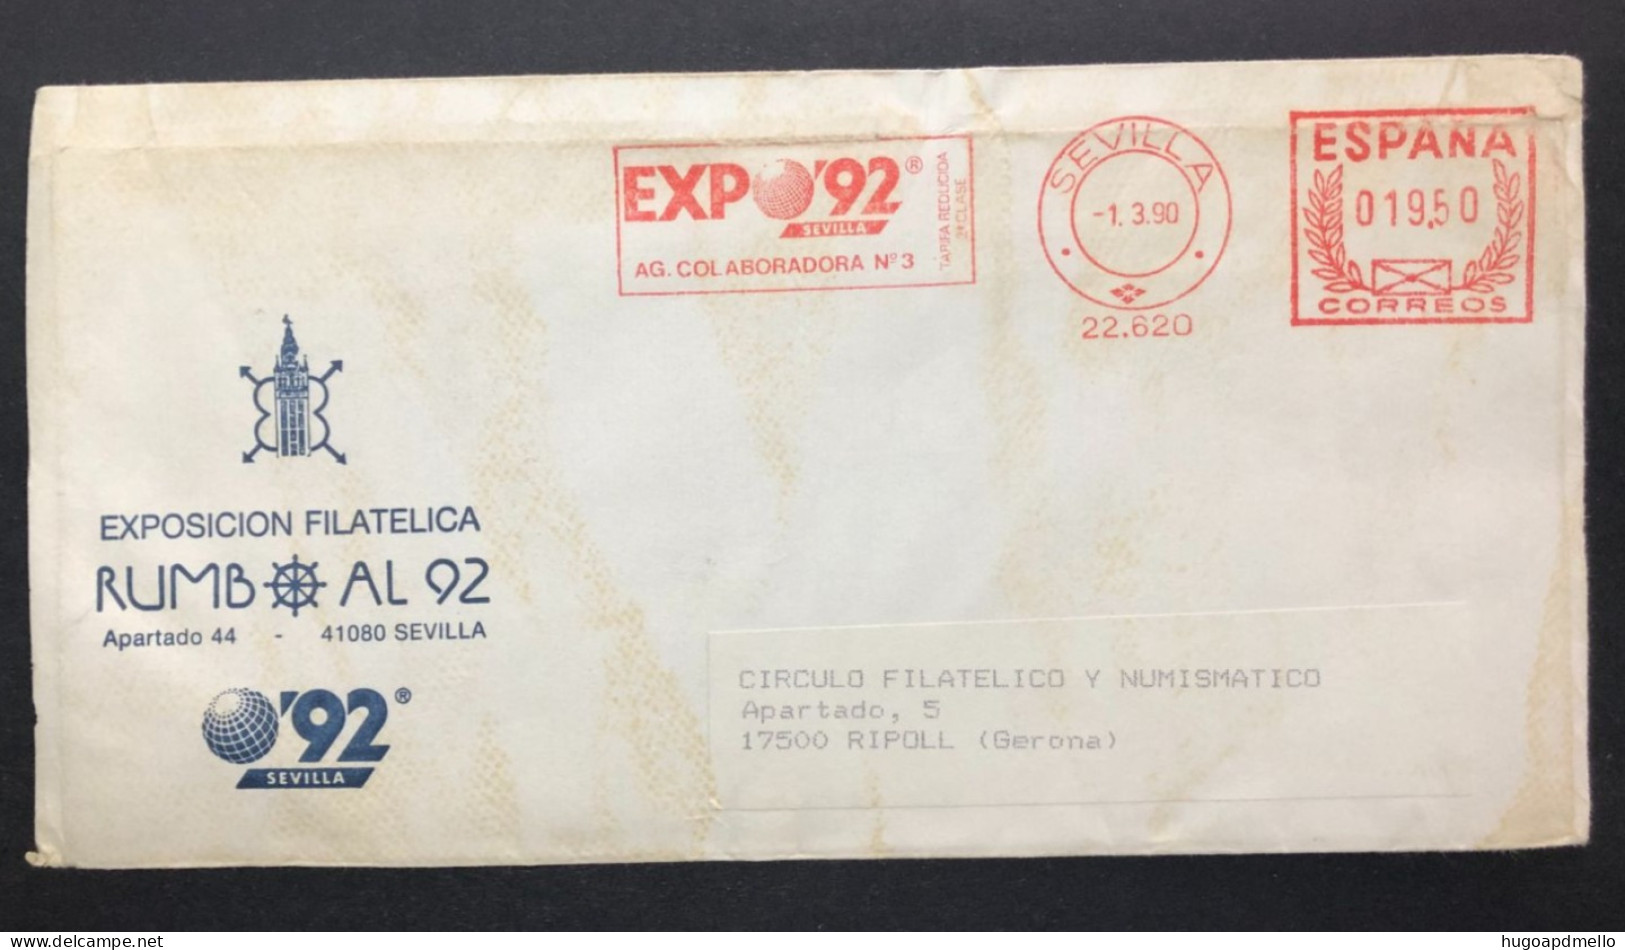 SPAIN, Cover With Special Cancellation « EXPO '92 », « SEVILLA Postmark », 1990 - 1992 – Sevilla (Spain)